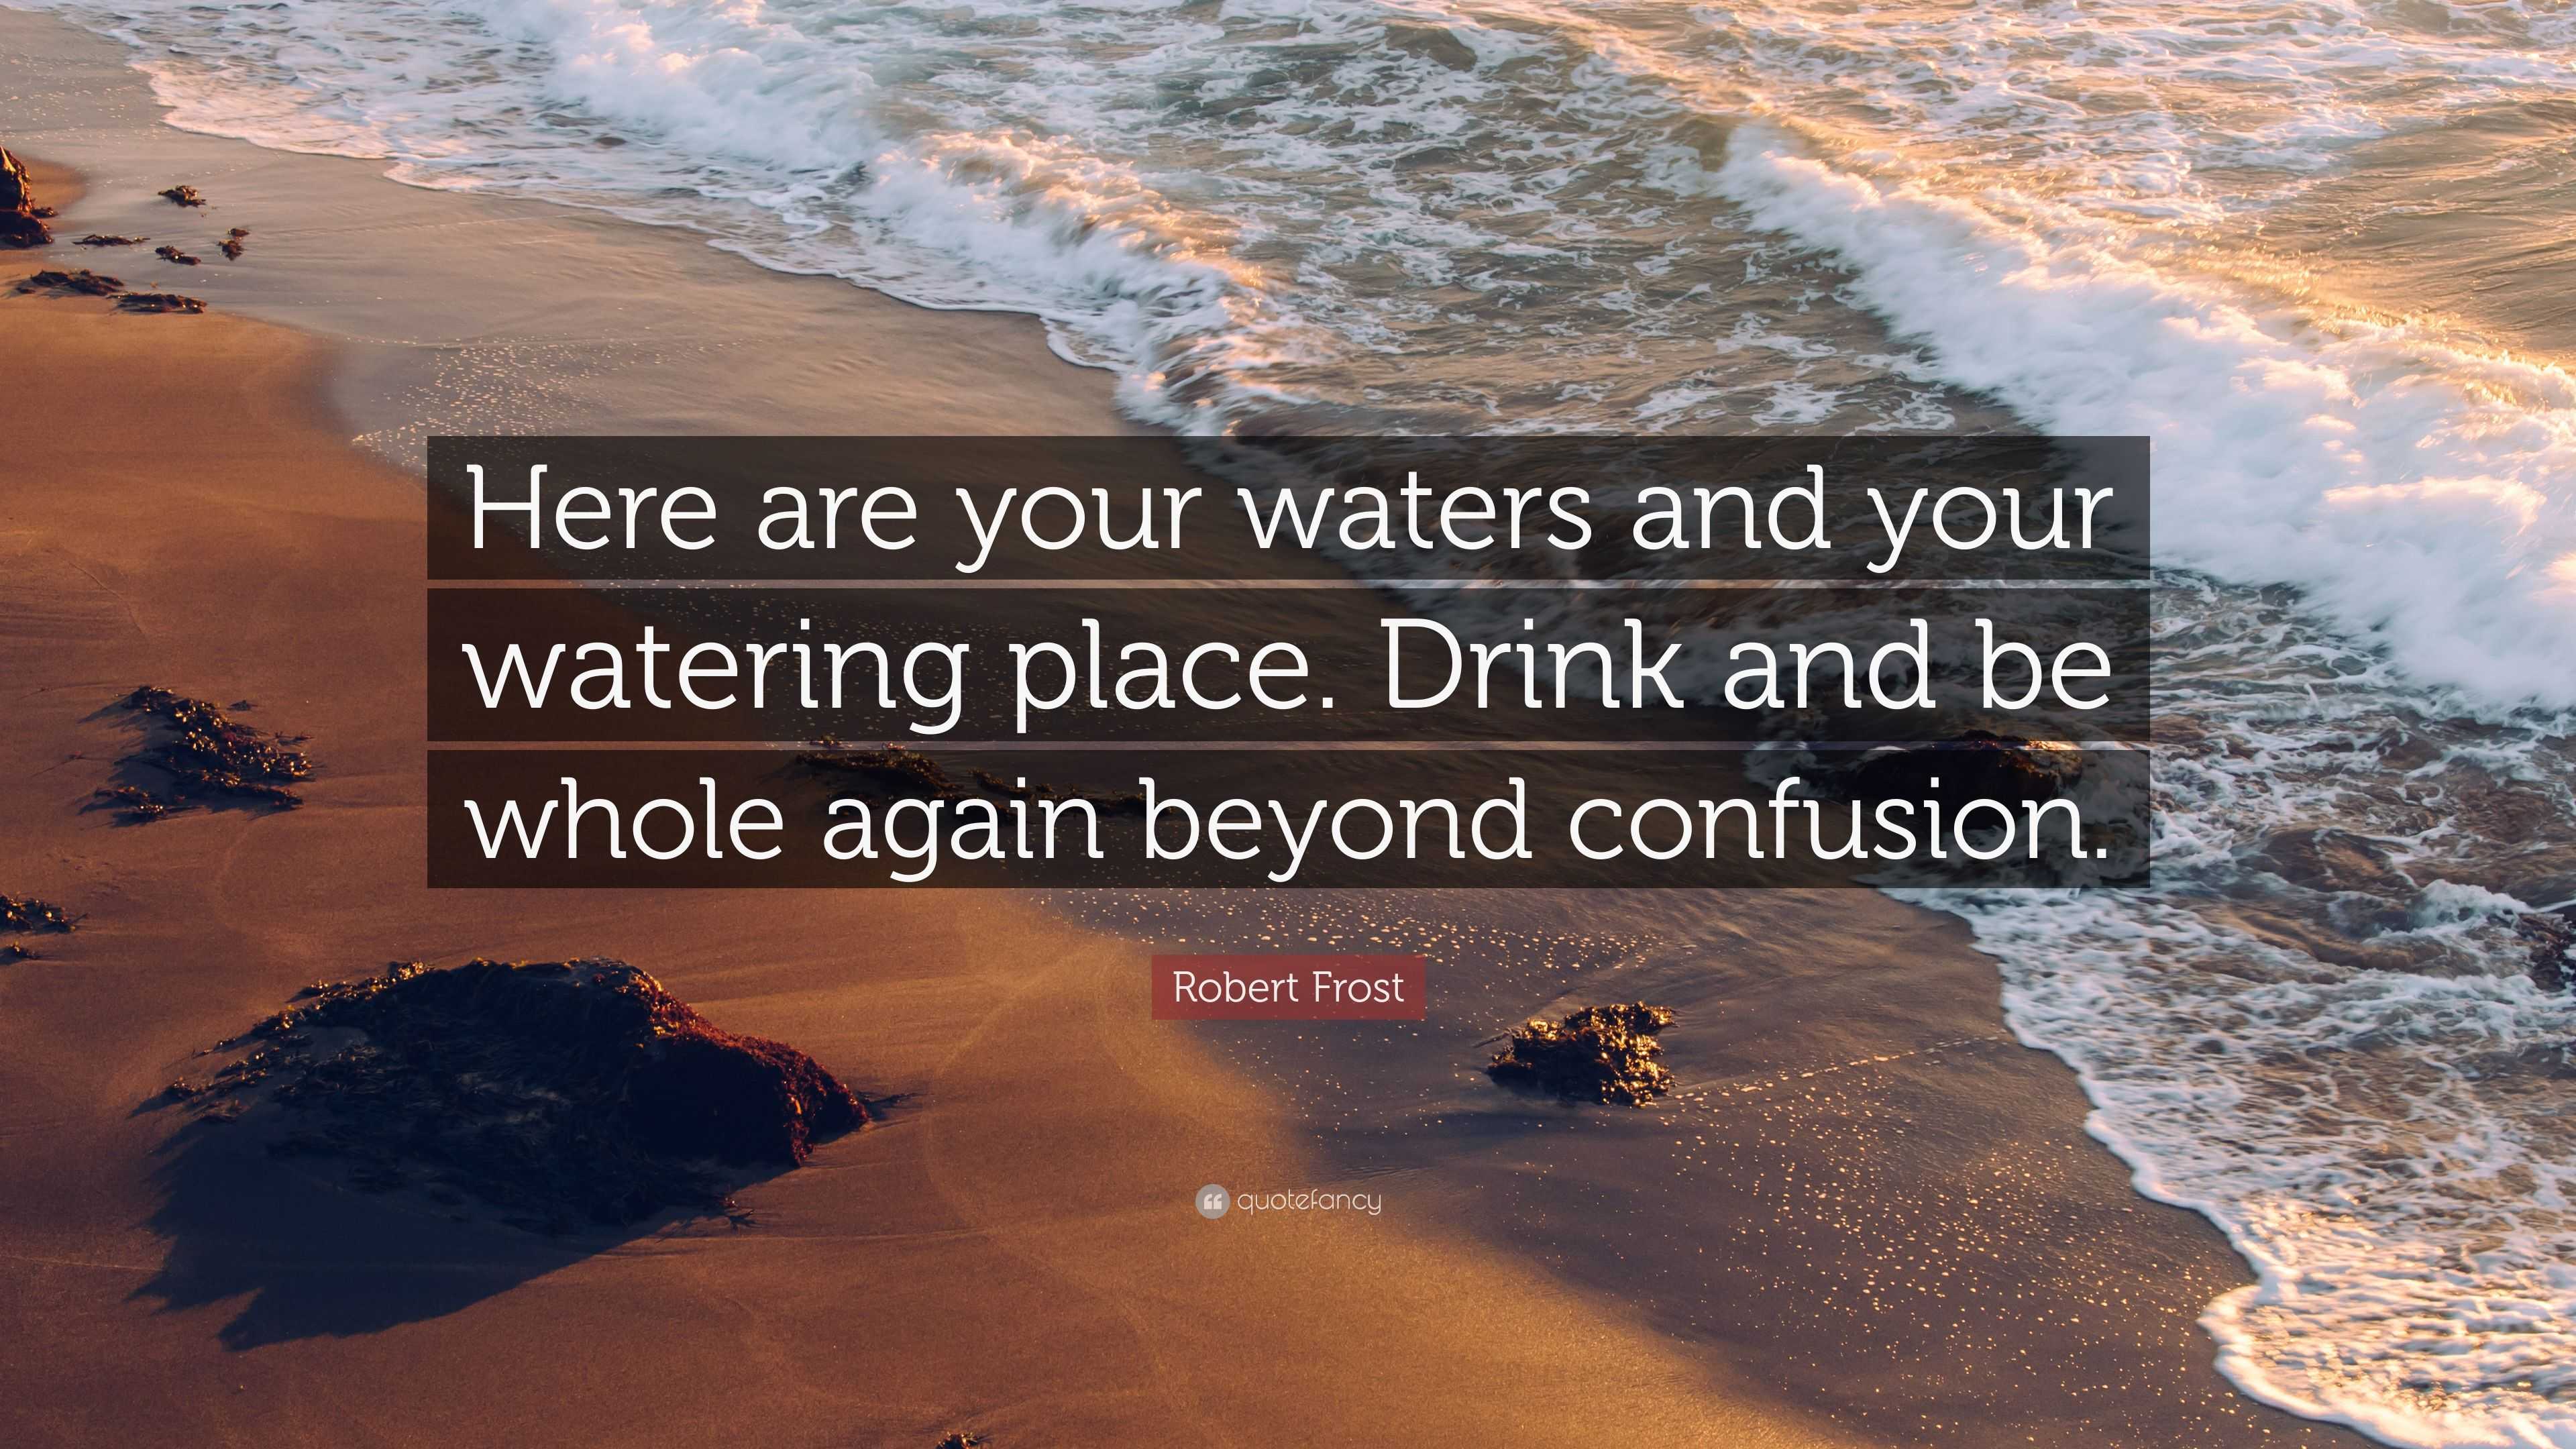 Robert Frost Quote: “Here are your waters and your watering place ...